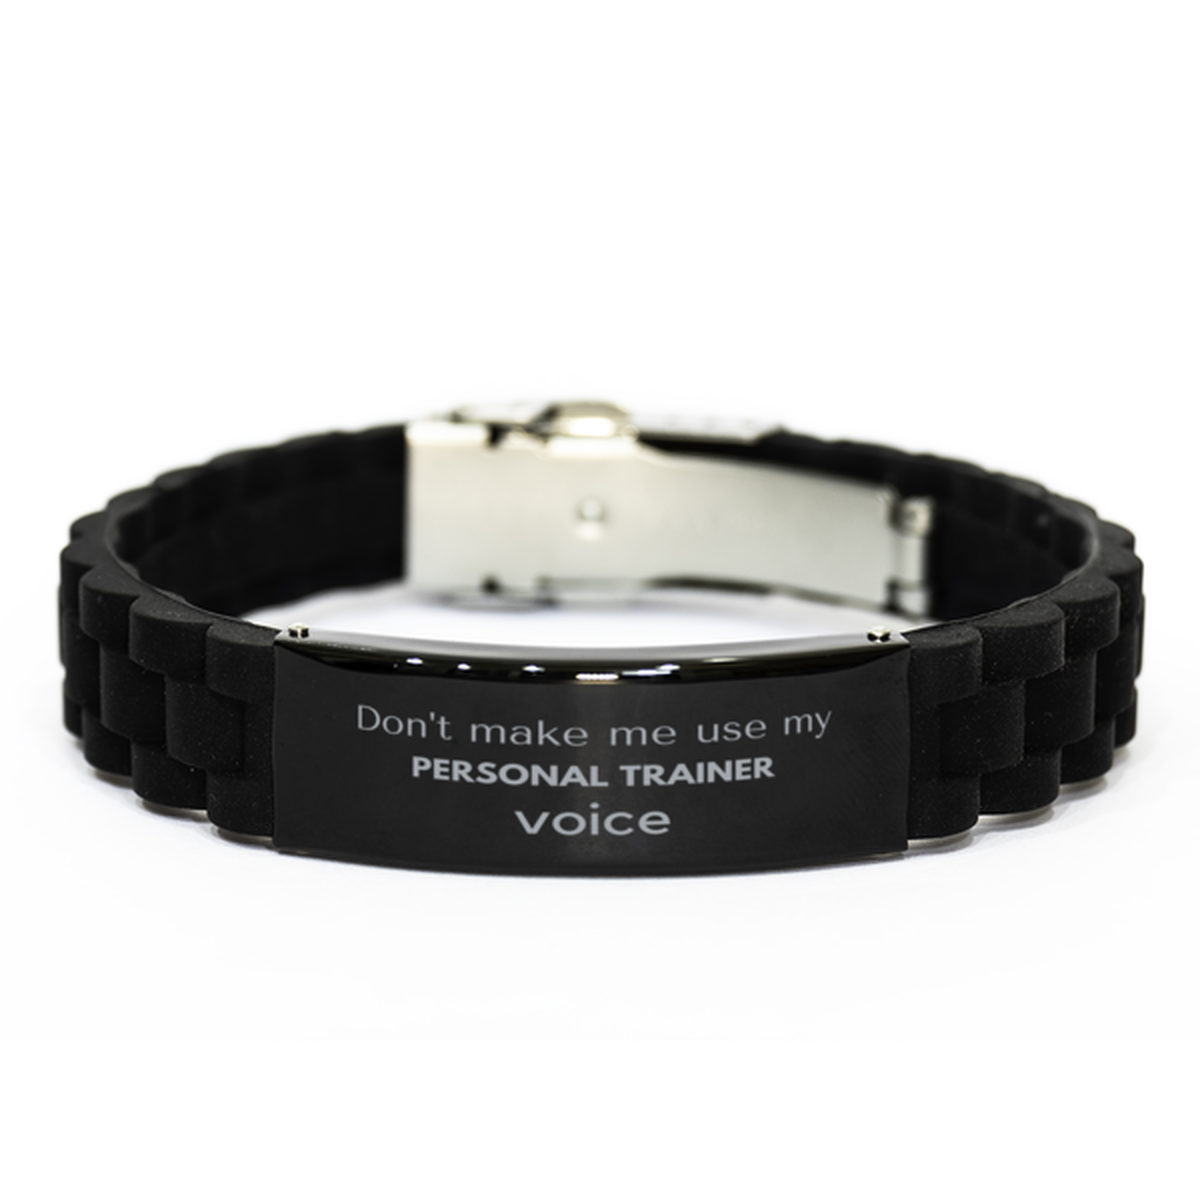 Don't make me use my Personal Trainer voice, Sarcasm Personal Trainer Gifts, Christmas Personal Trainer Black Glidelock Clasp Bracelet Birthday Unique Gifts For Personal Trainer Coworkers, Men, Women, Colleague, Friends